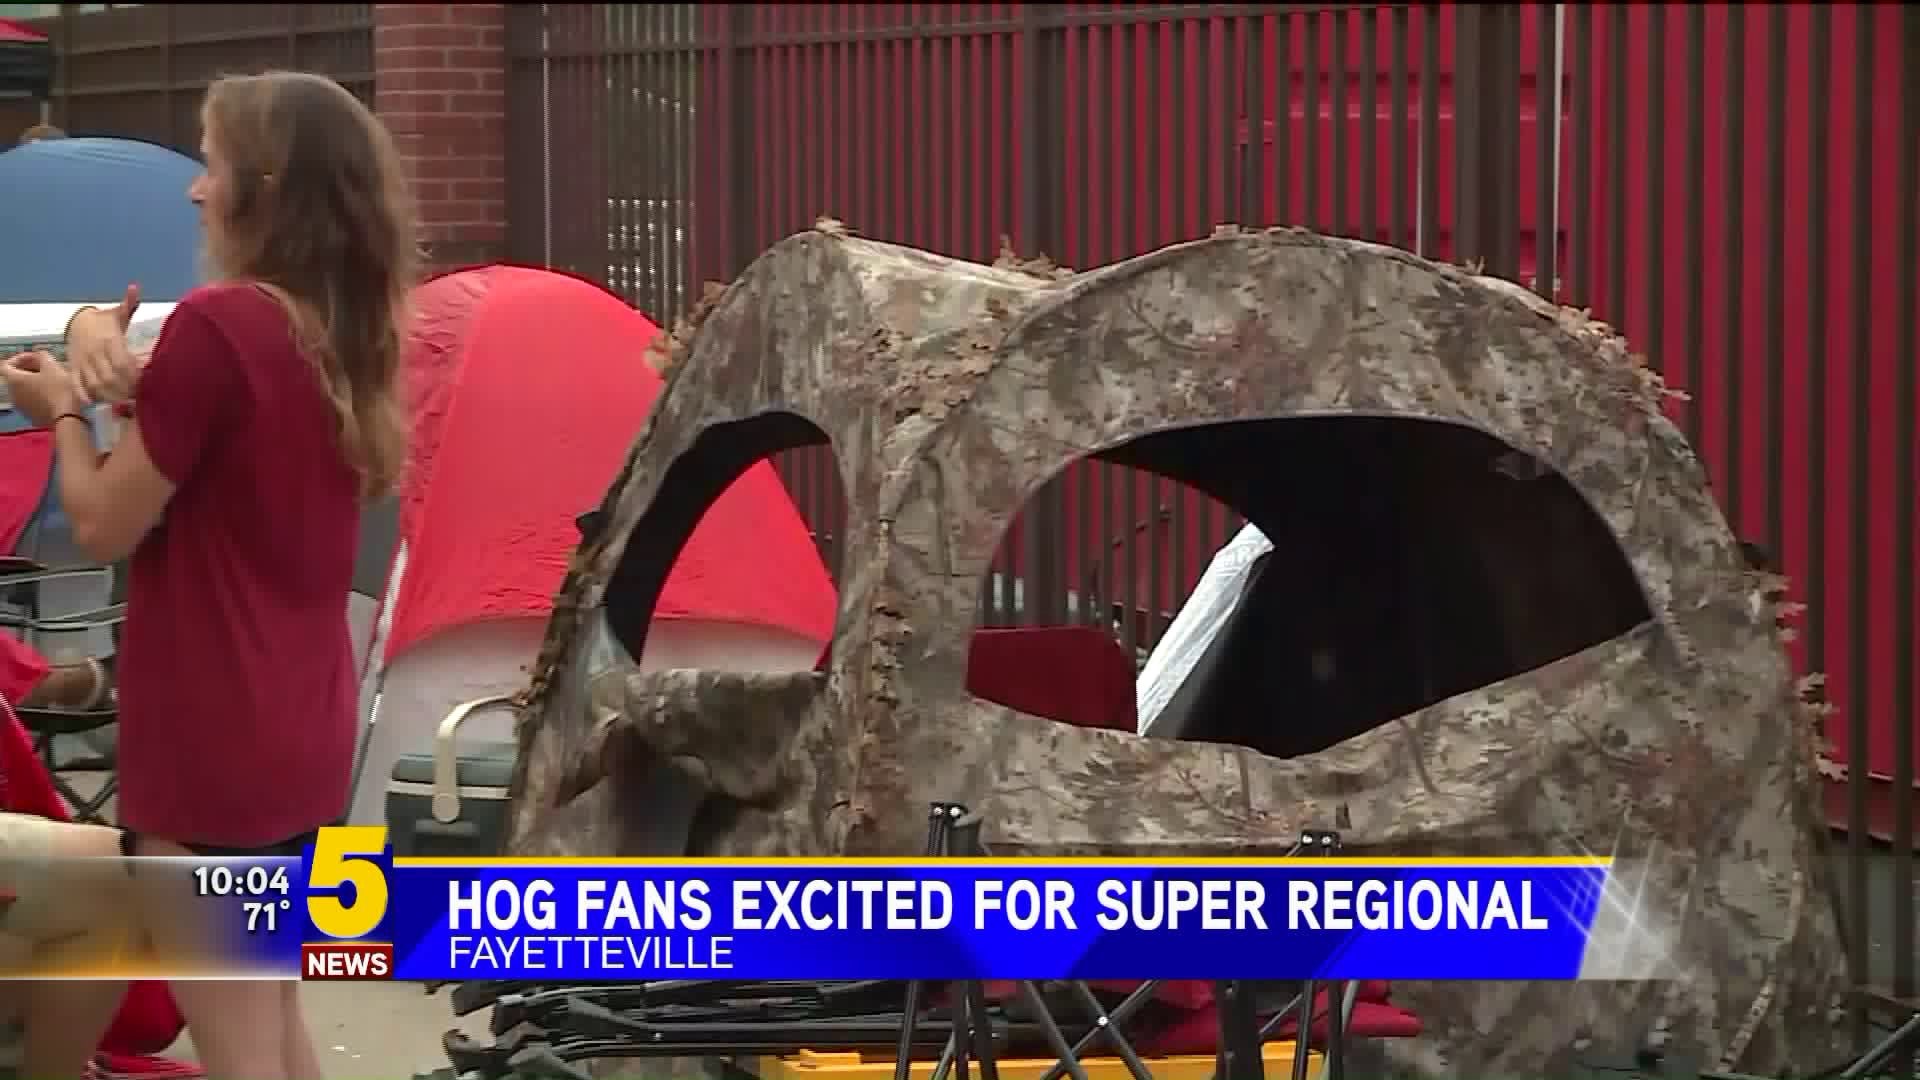 Fans Camp Out for Hog Game